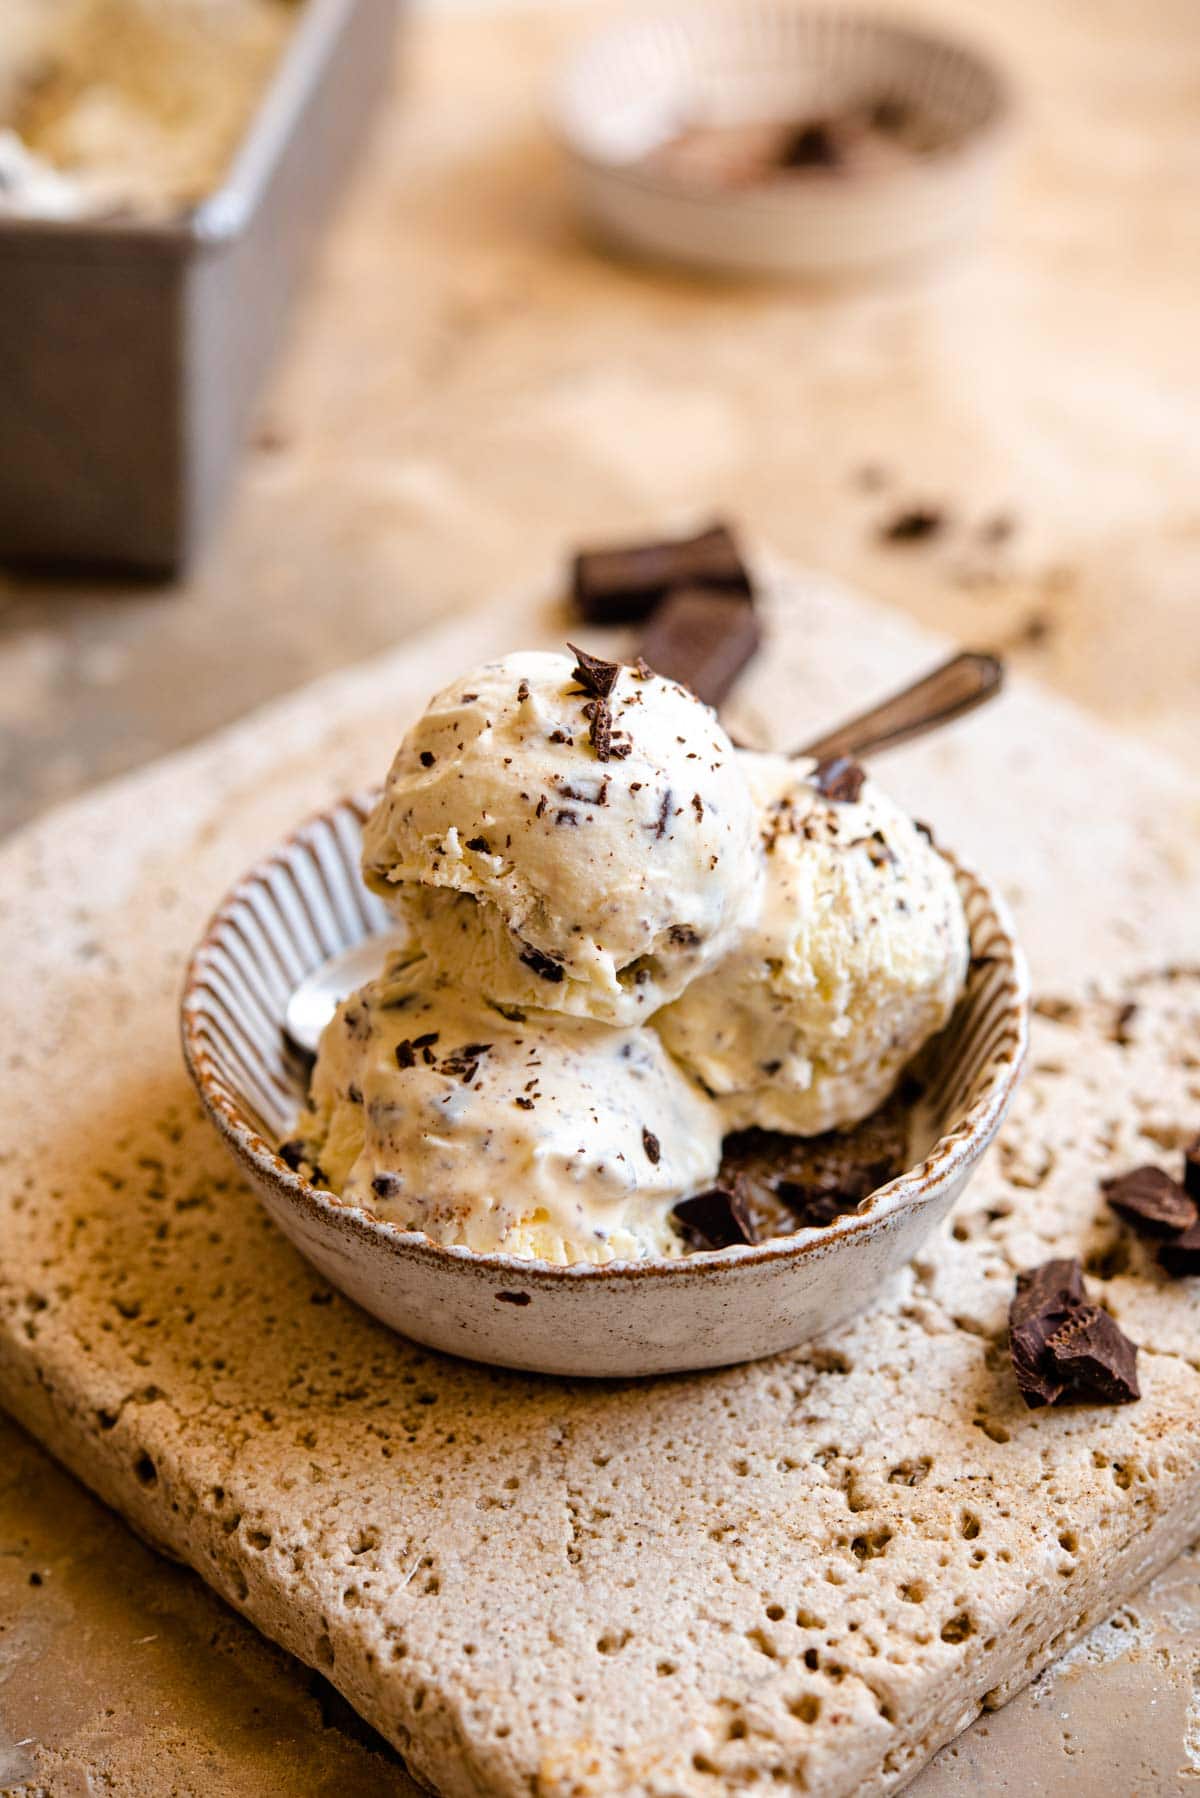 A close up of three scoops of ice cream in a rustic dish